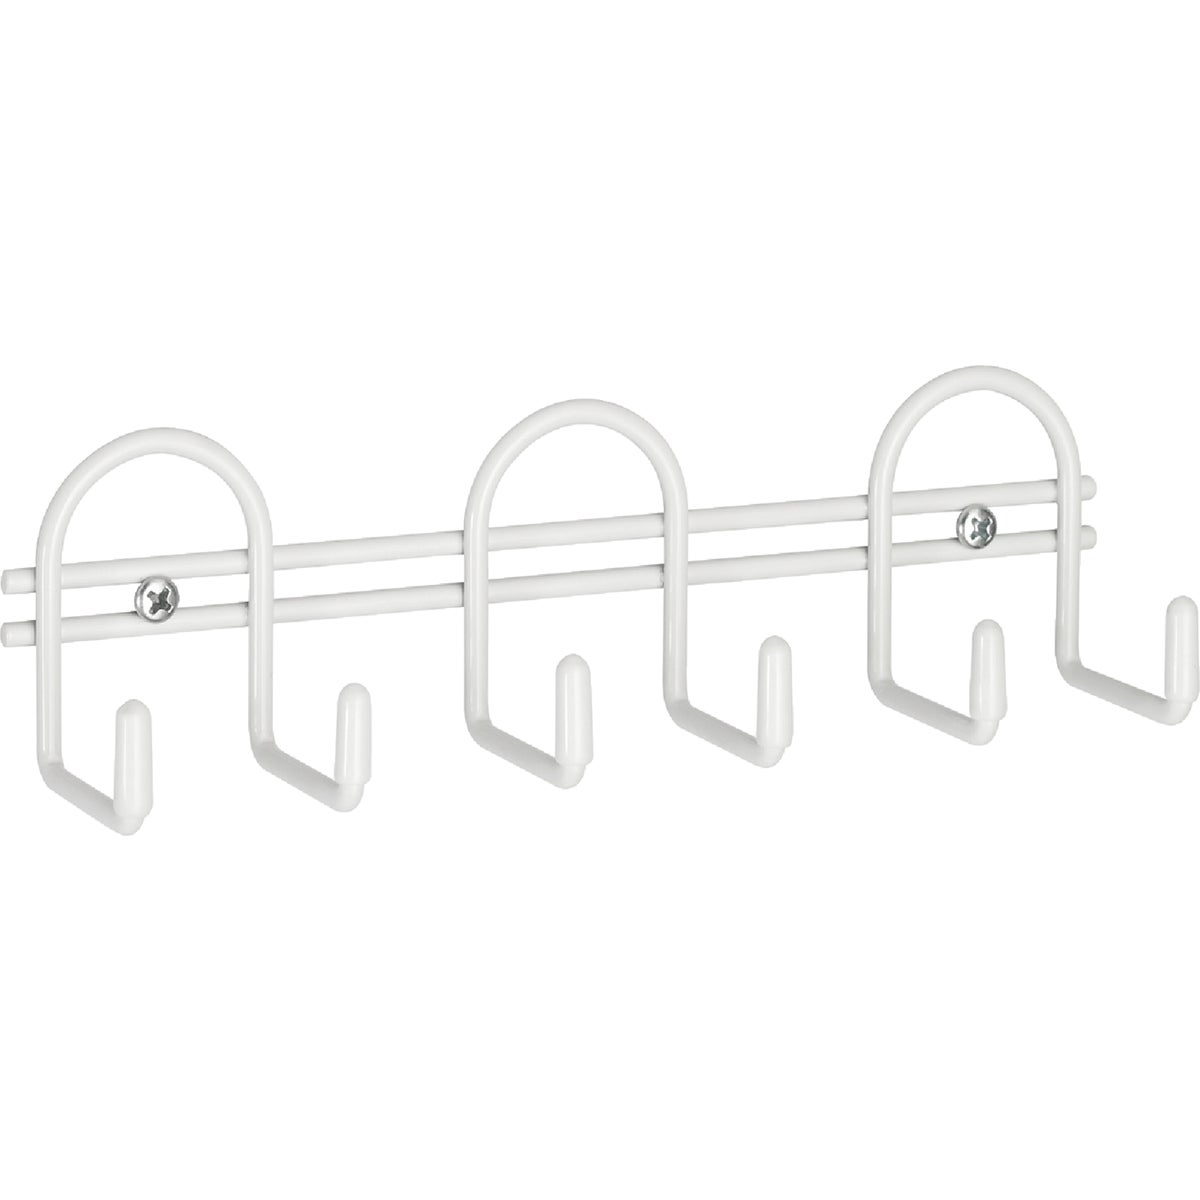 Item 200588, Utility hook is ideal for bedrooms or entry ways, giving easy access to 